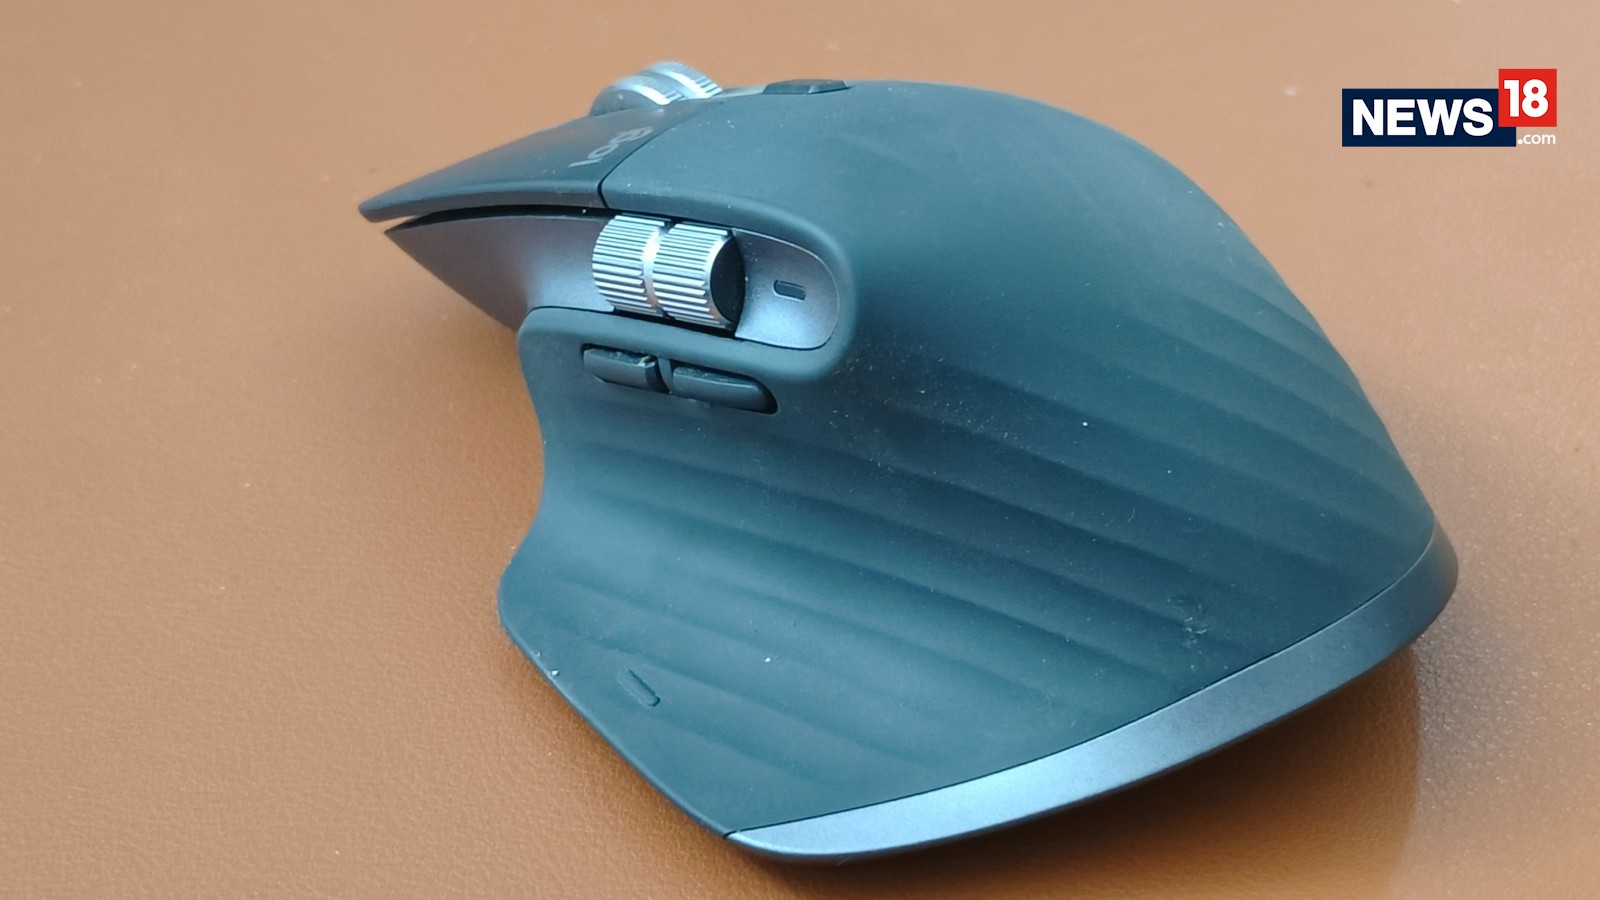 Logitech MX Master At News18 - Keyboard MX Premium Mouse Mechanical A Review: Comfort 3S And